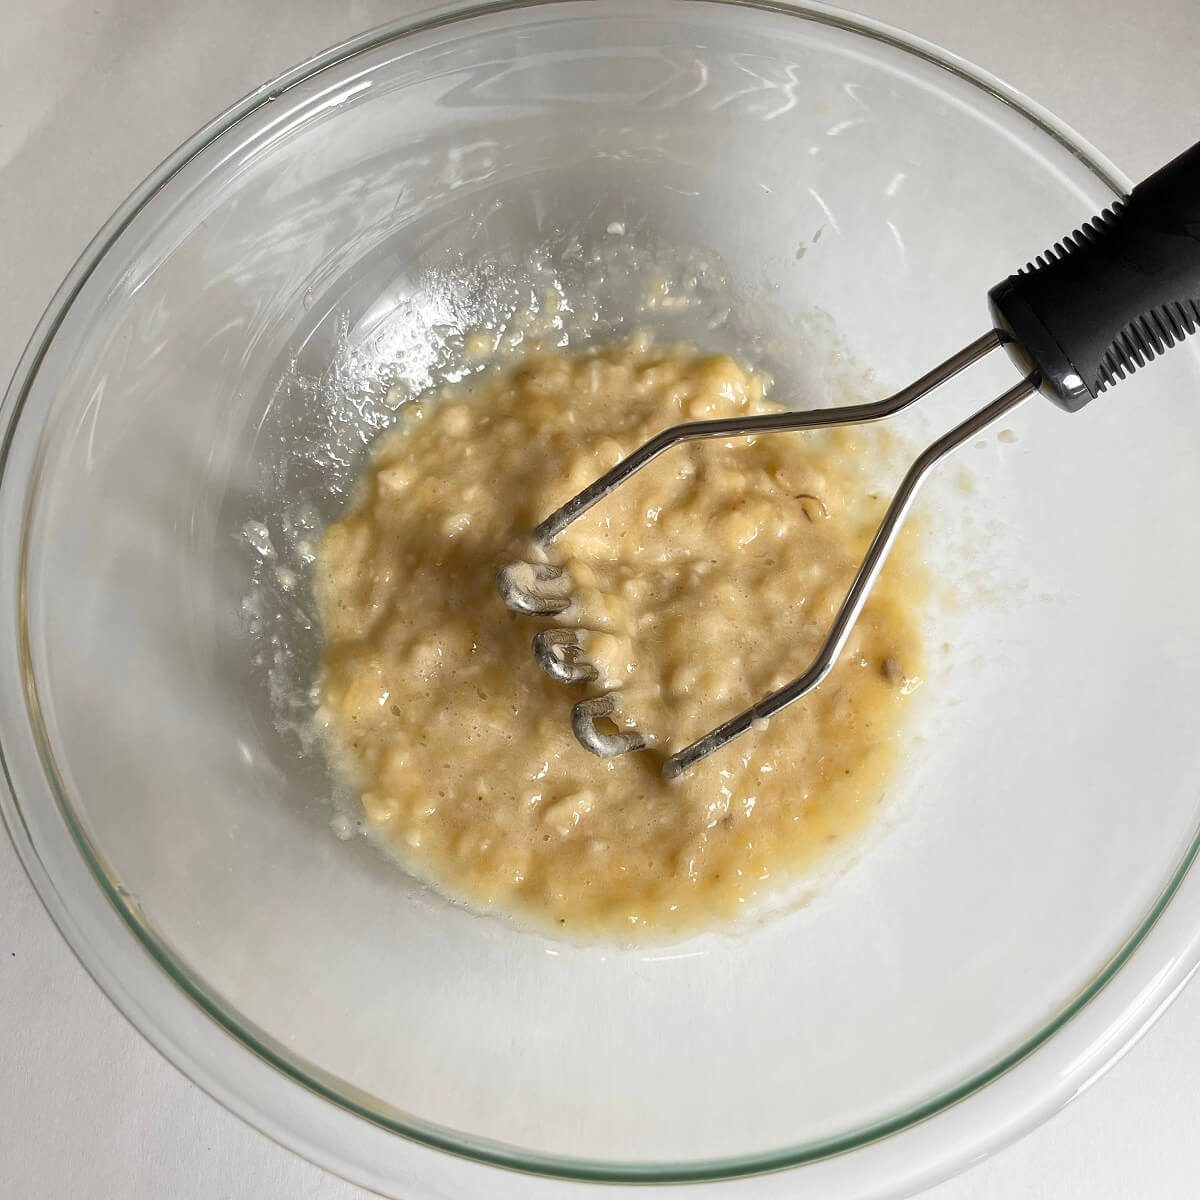 Ripe bananas being mashed by a potato masher in a glass bowl.